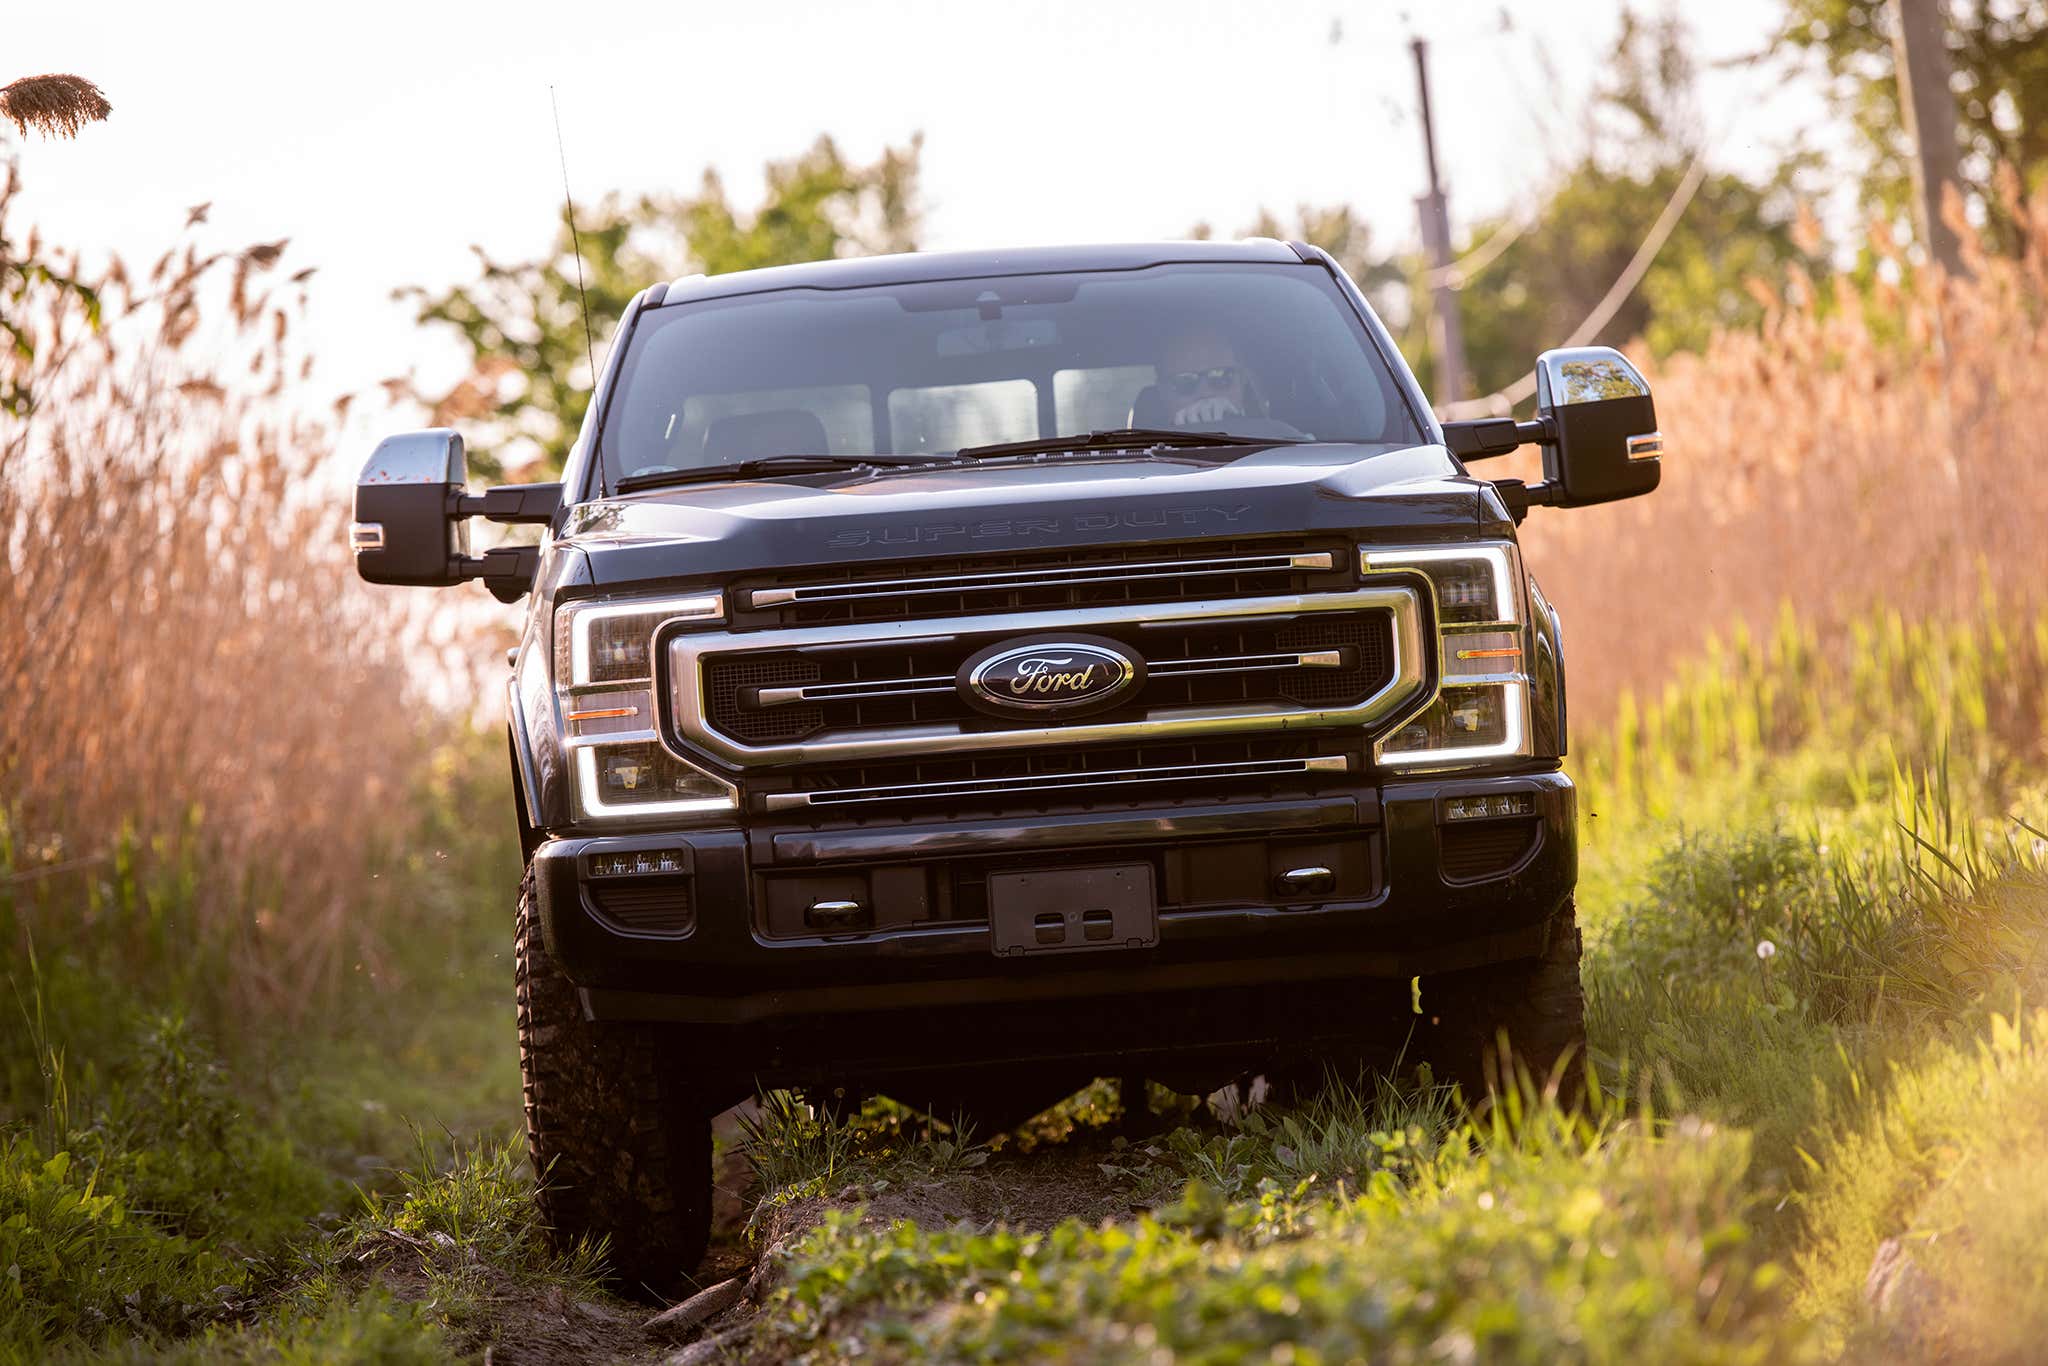 2020 Ford Super Duty F 250 Tremor 6 7l Review The Ultimate Bug Out Truck